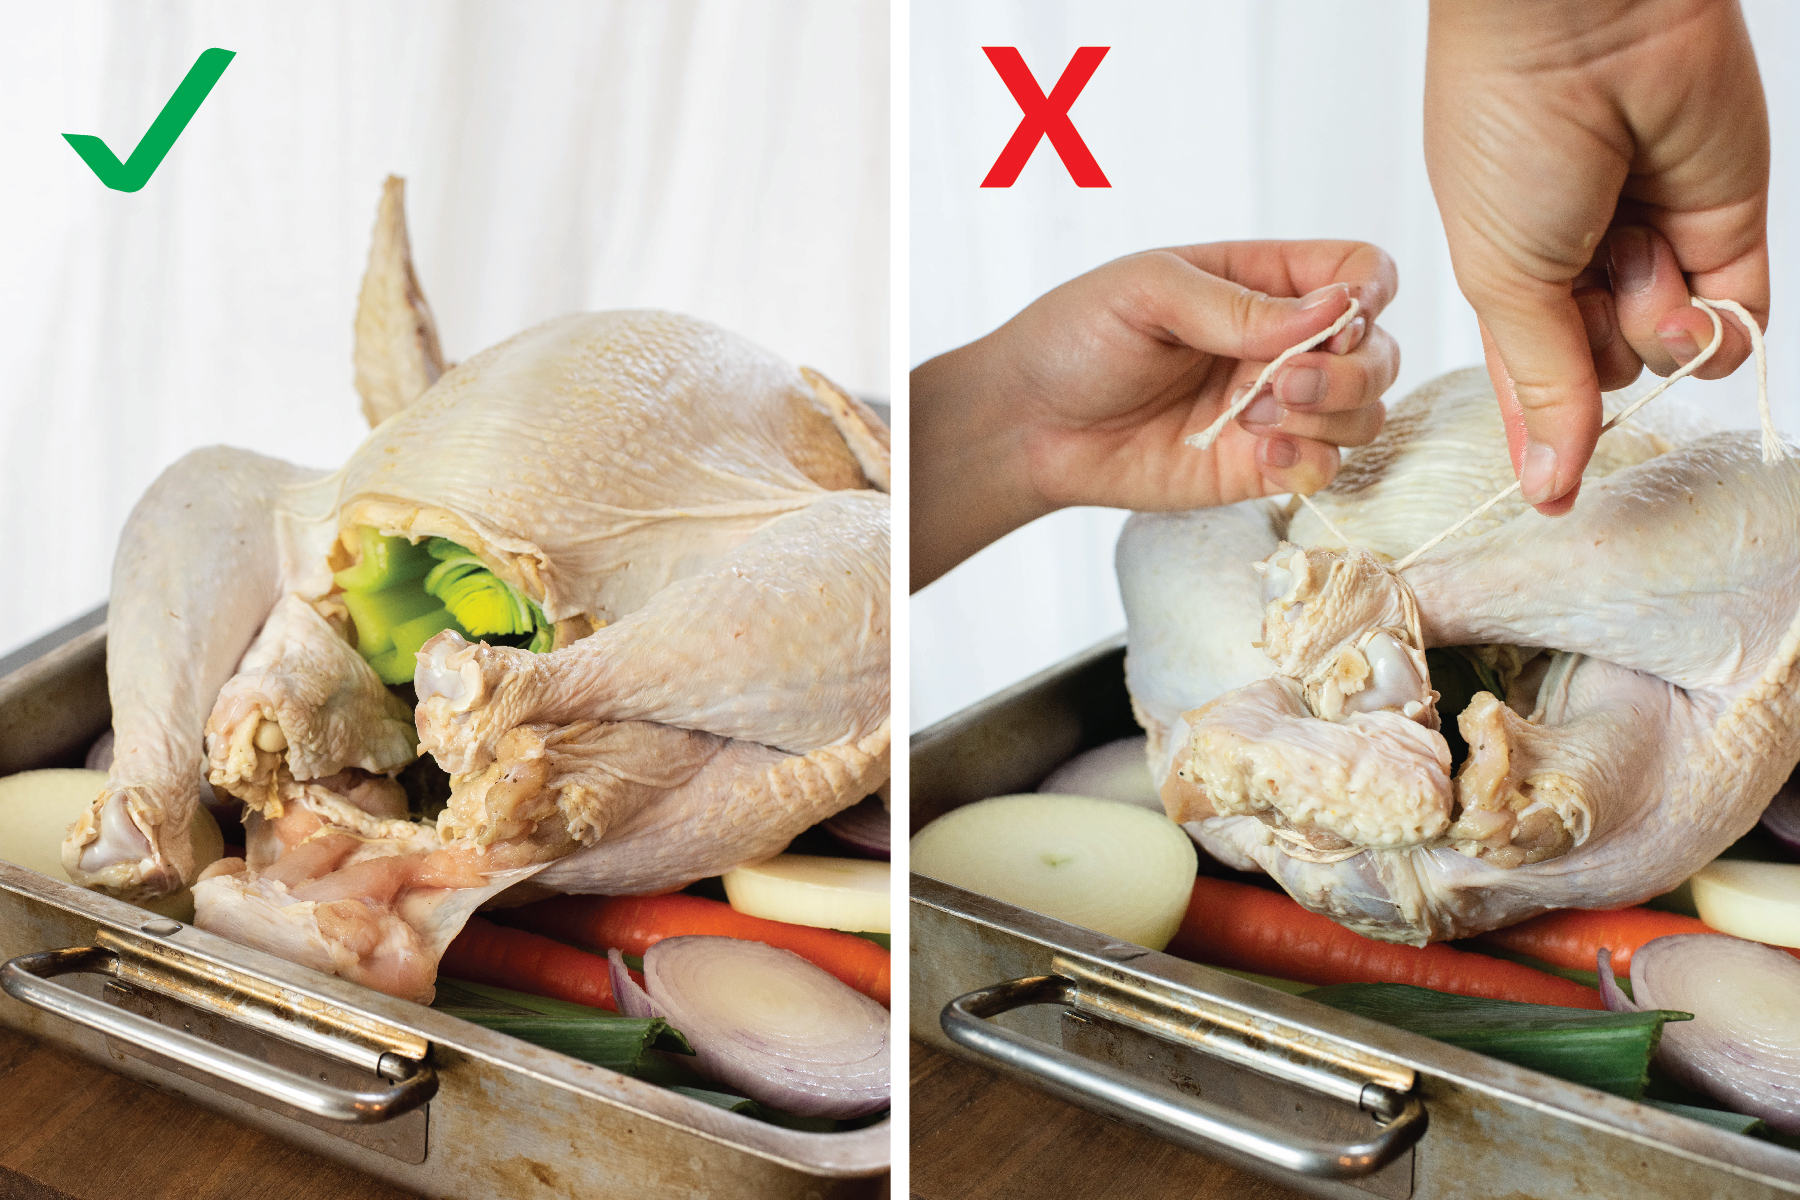 Where to Put Thermometer in Turkey? Thanksgiving Tips